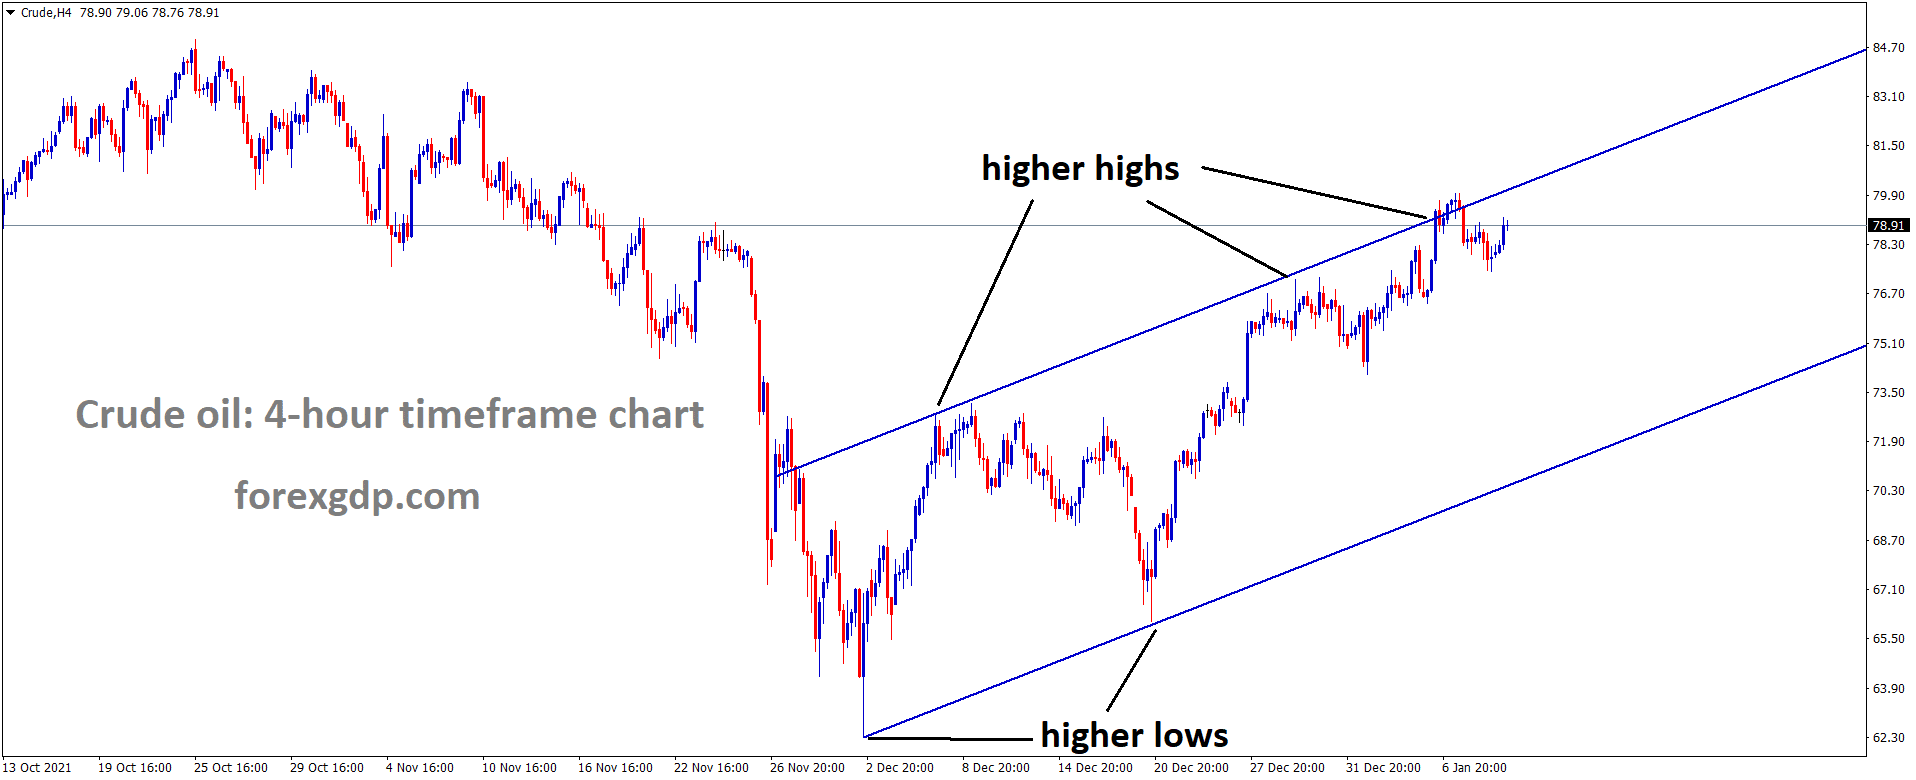 Crude oil is moving in an Ascending channel and the market has reached the higher high area of the channel.